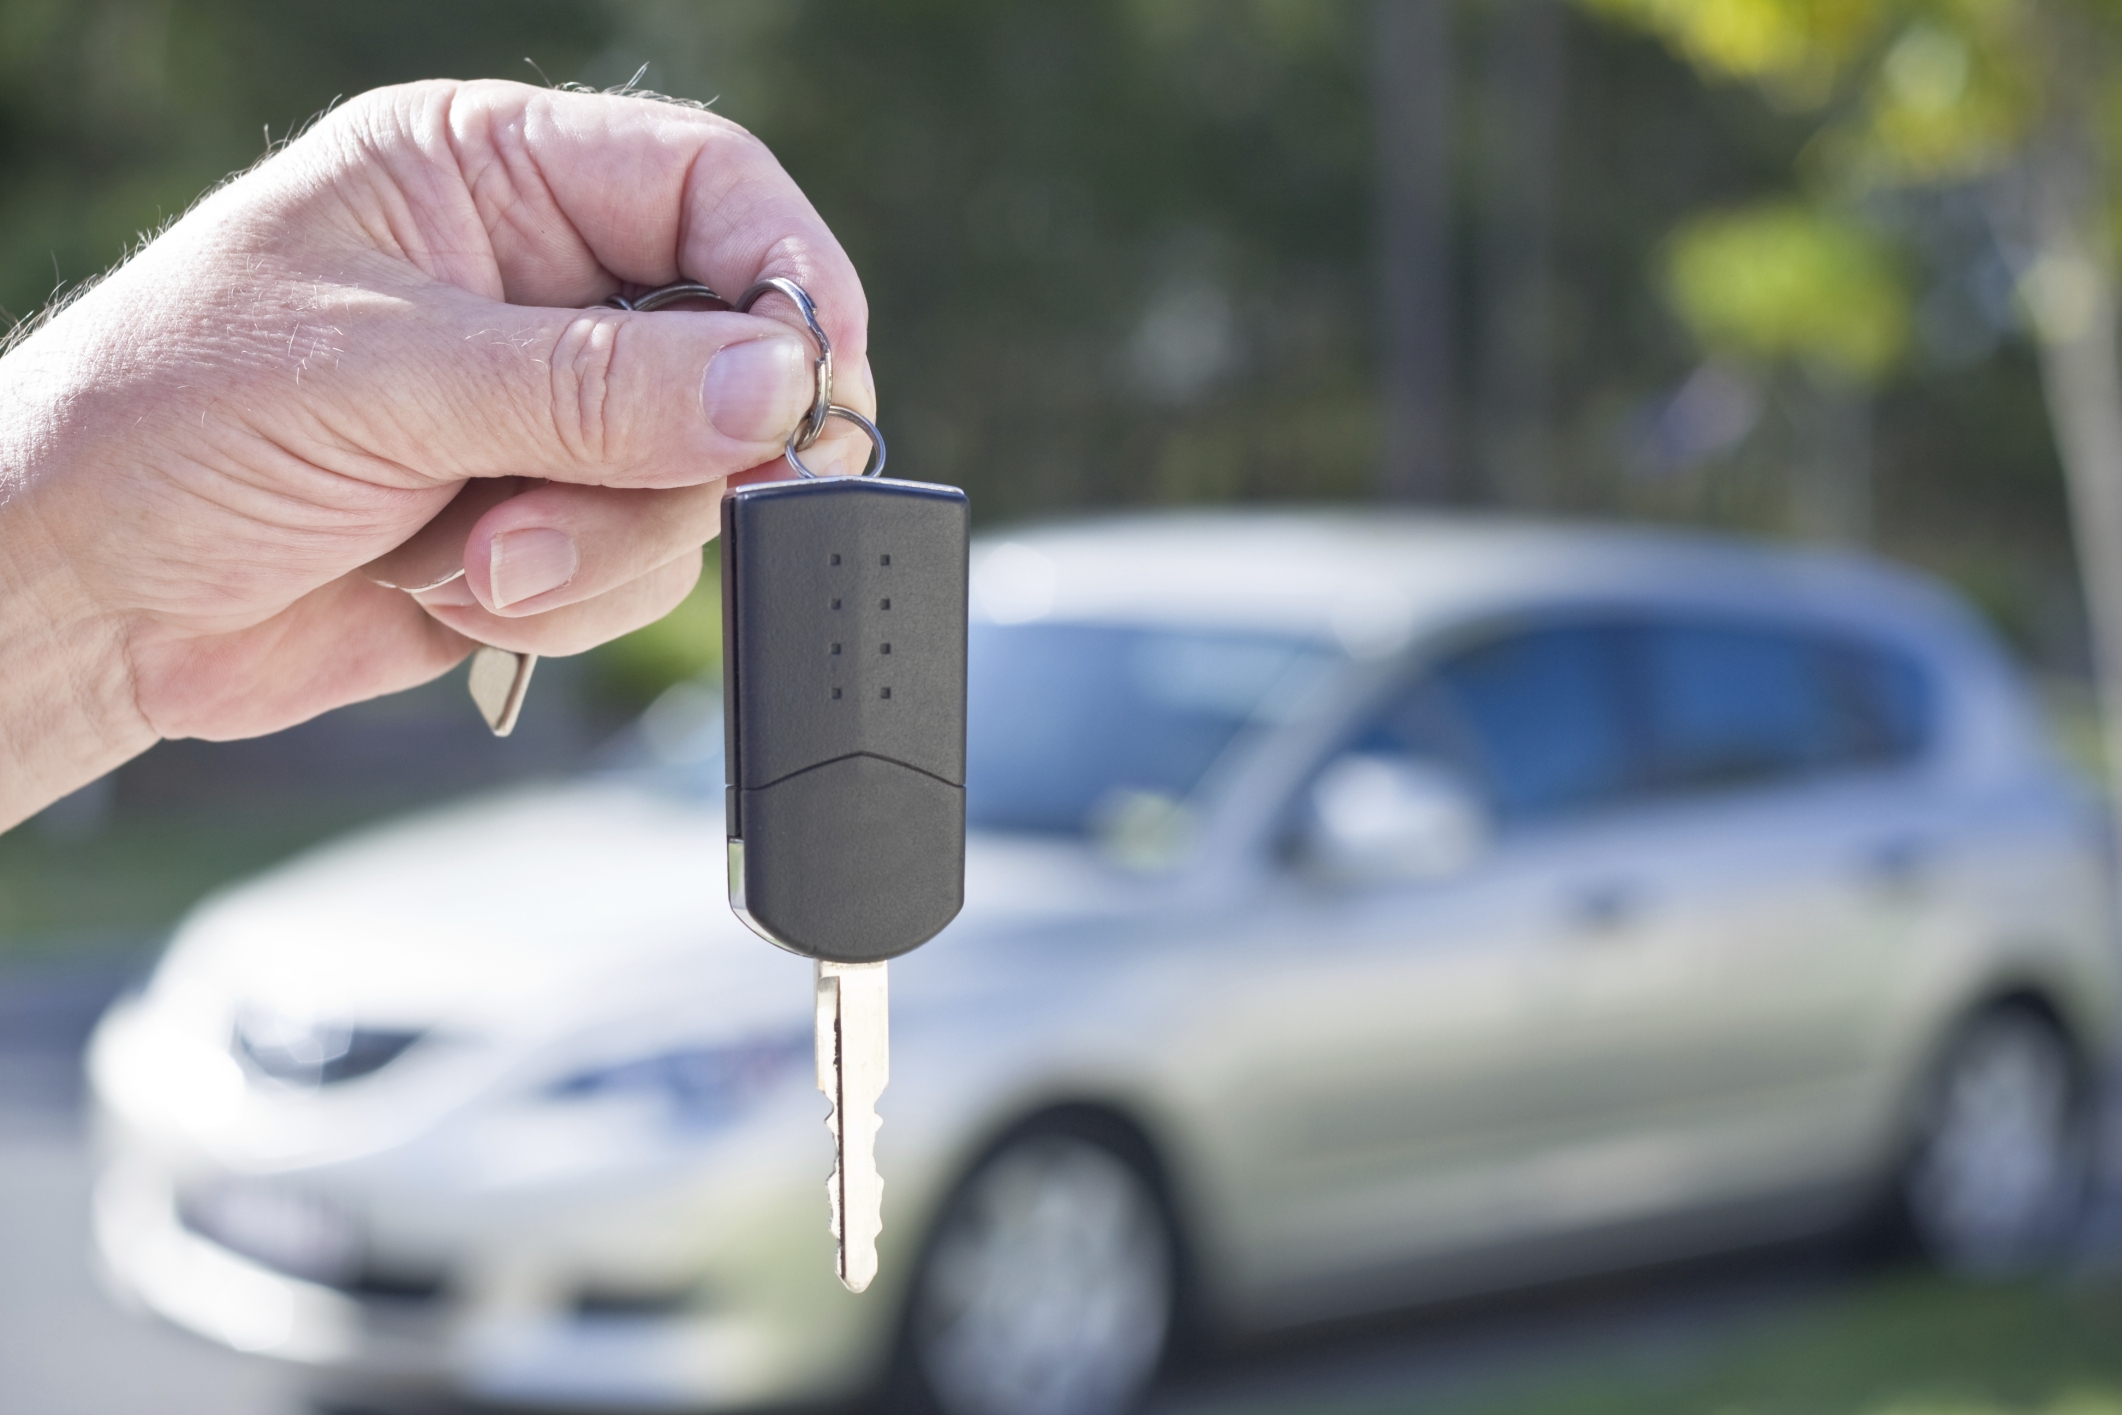 Buying Used Cars: Dealership Is A Brilliant Choice